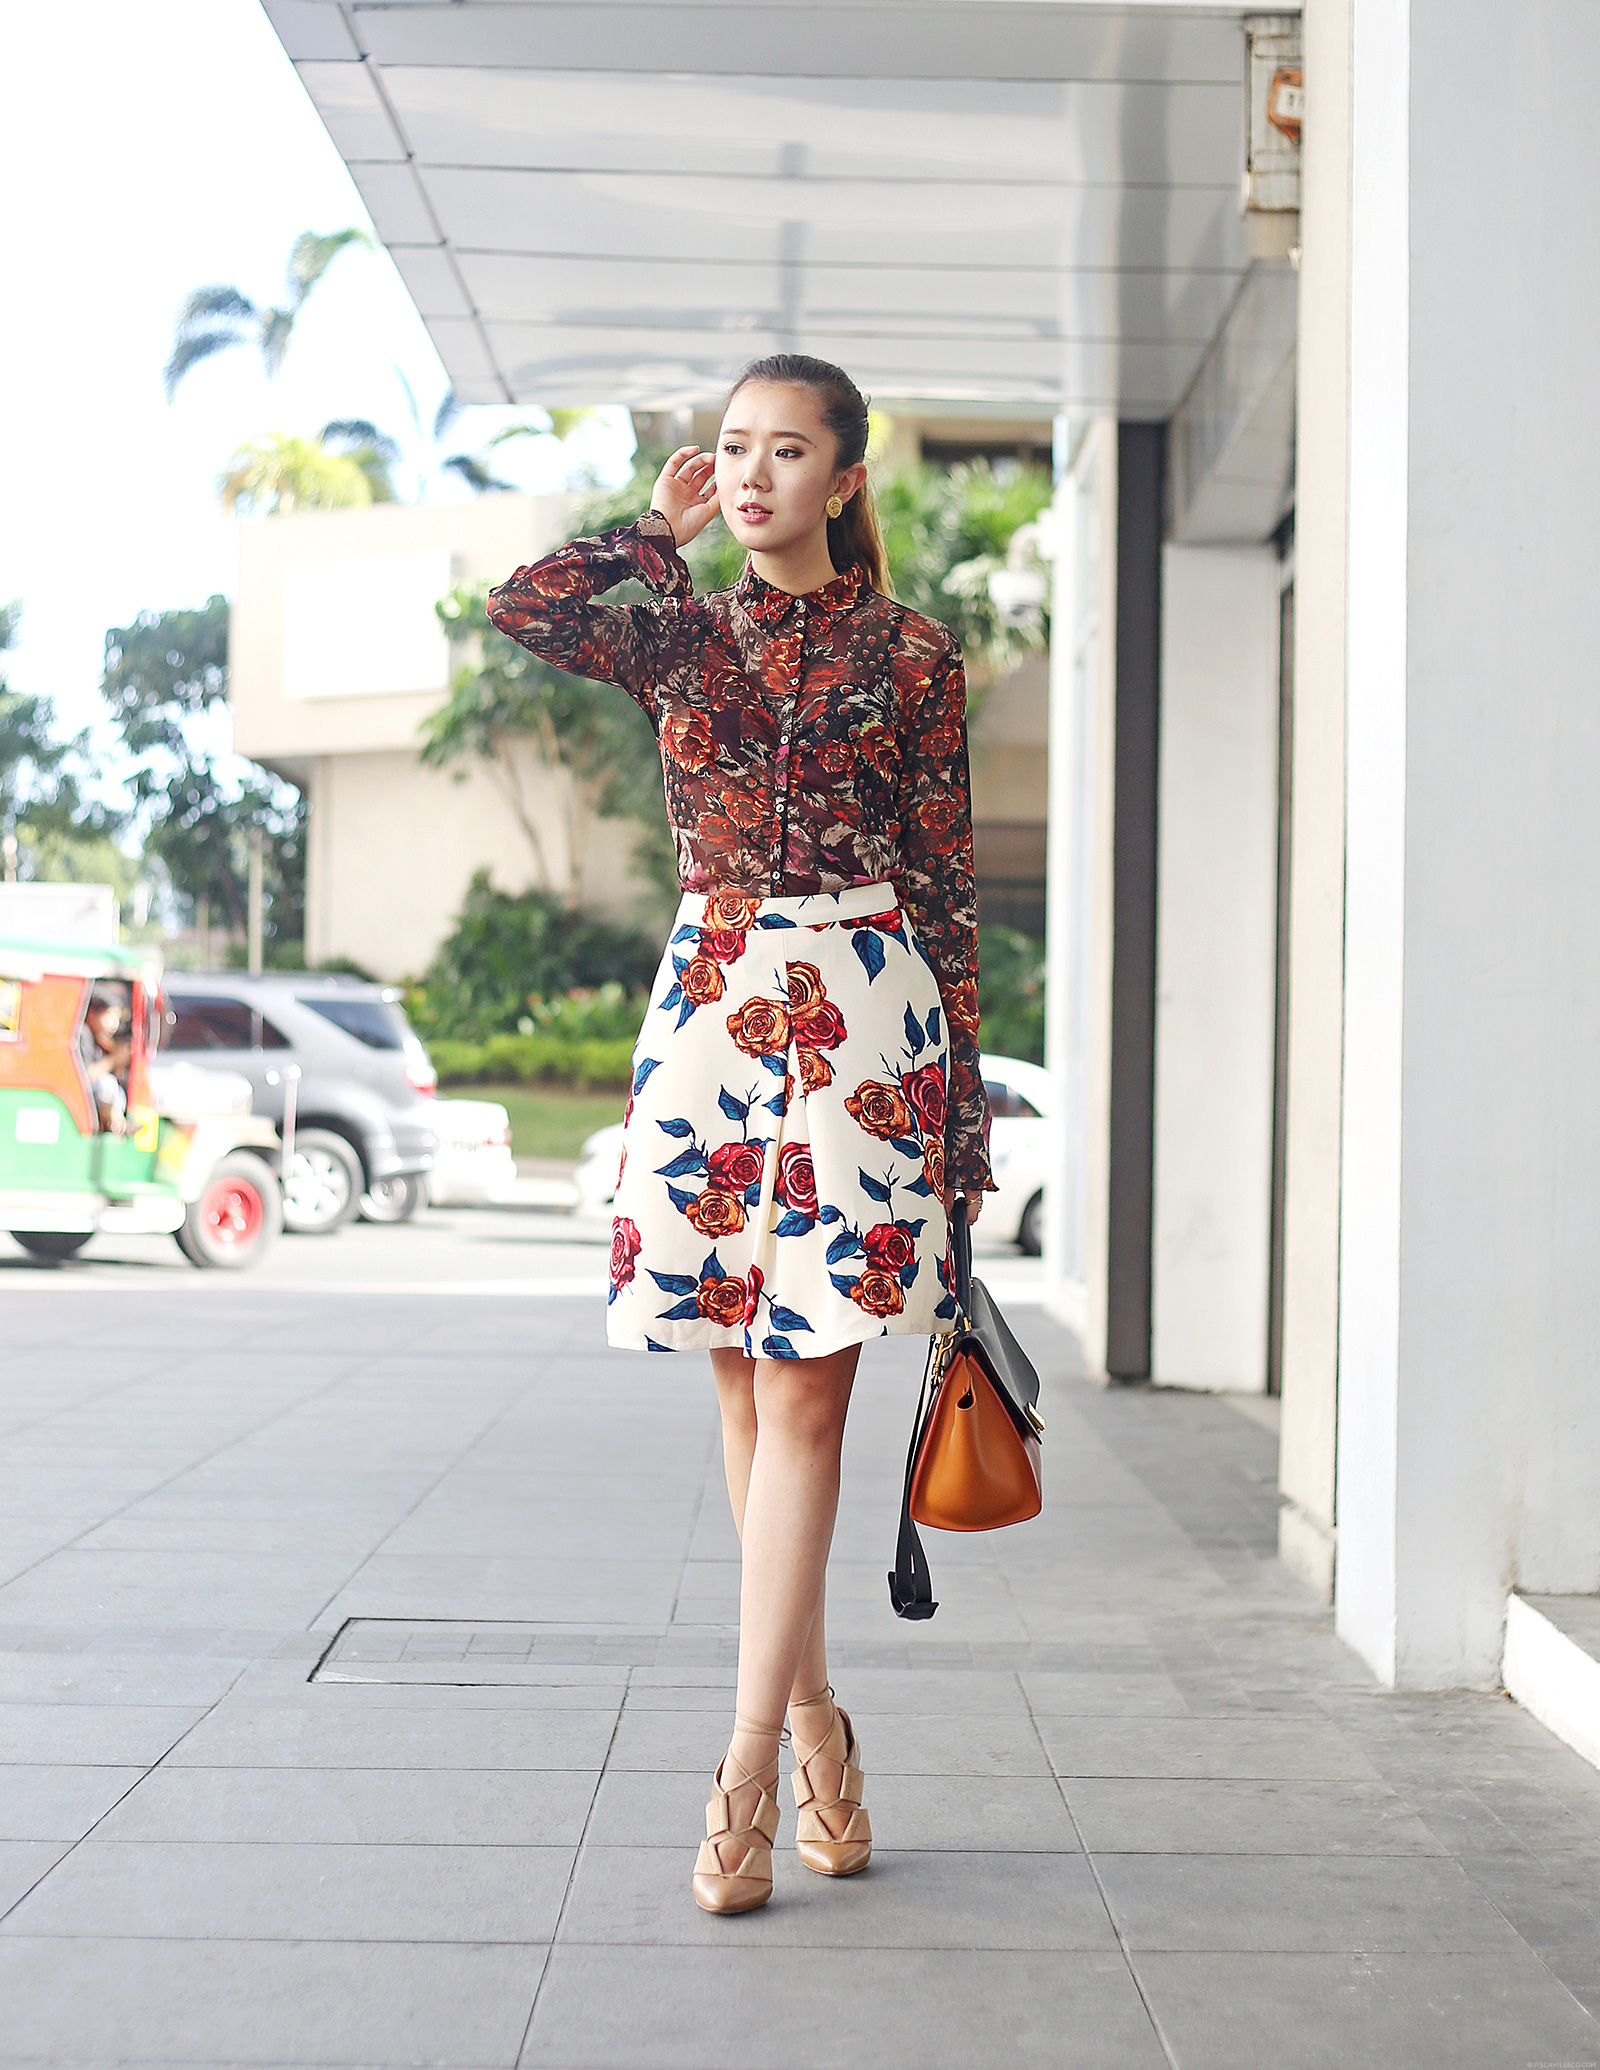 Floral Print On Print Featuring Marks & Spencer top, PB&J Skirt, Alexander Wang heels, Celine trapeze | www.itscamilleco.com